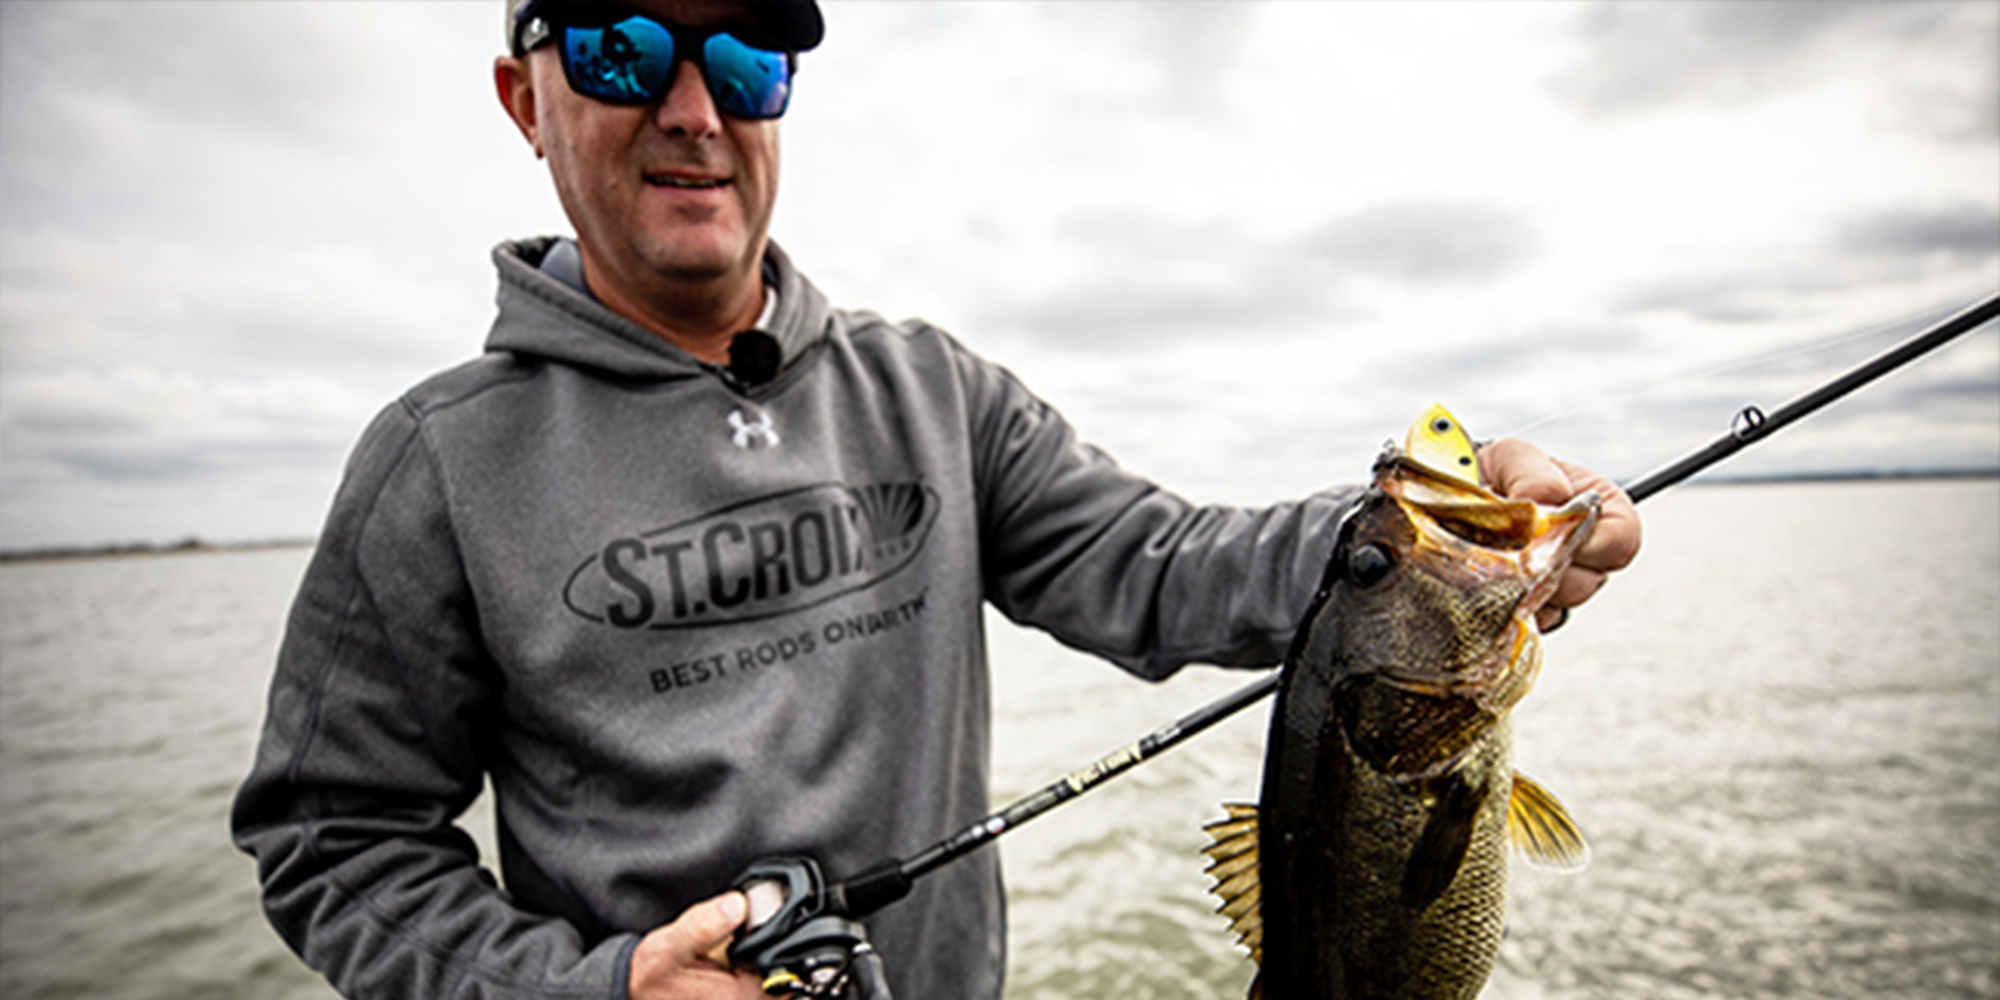 Need a reel to go with my new st. croix rod? - Minnesota Fishing – General  Discussion - Minnesota Fishing – General Discussion